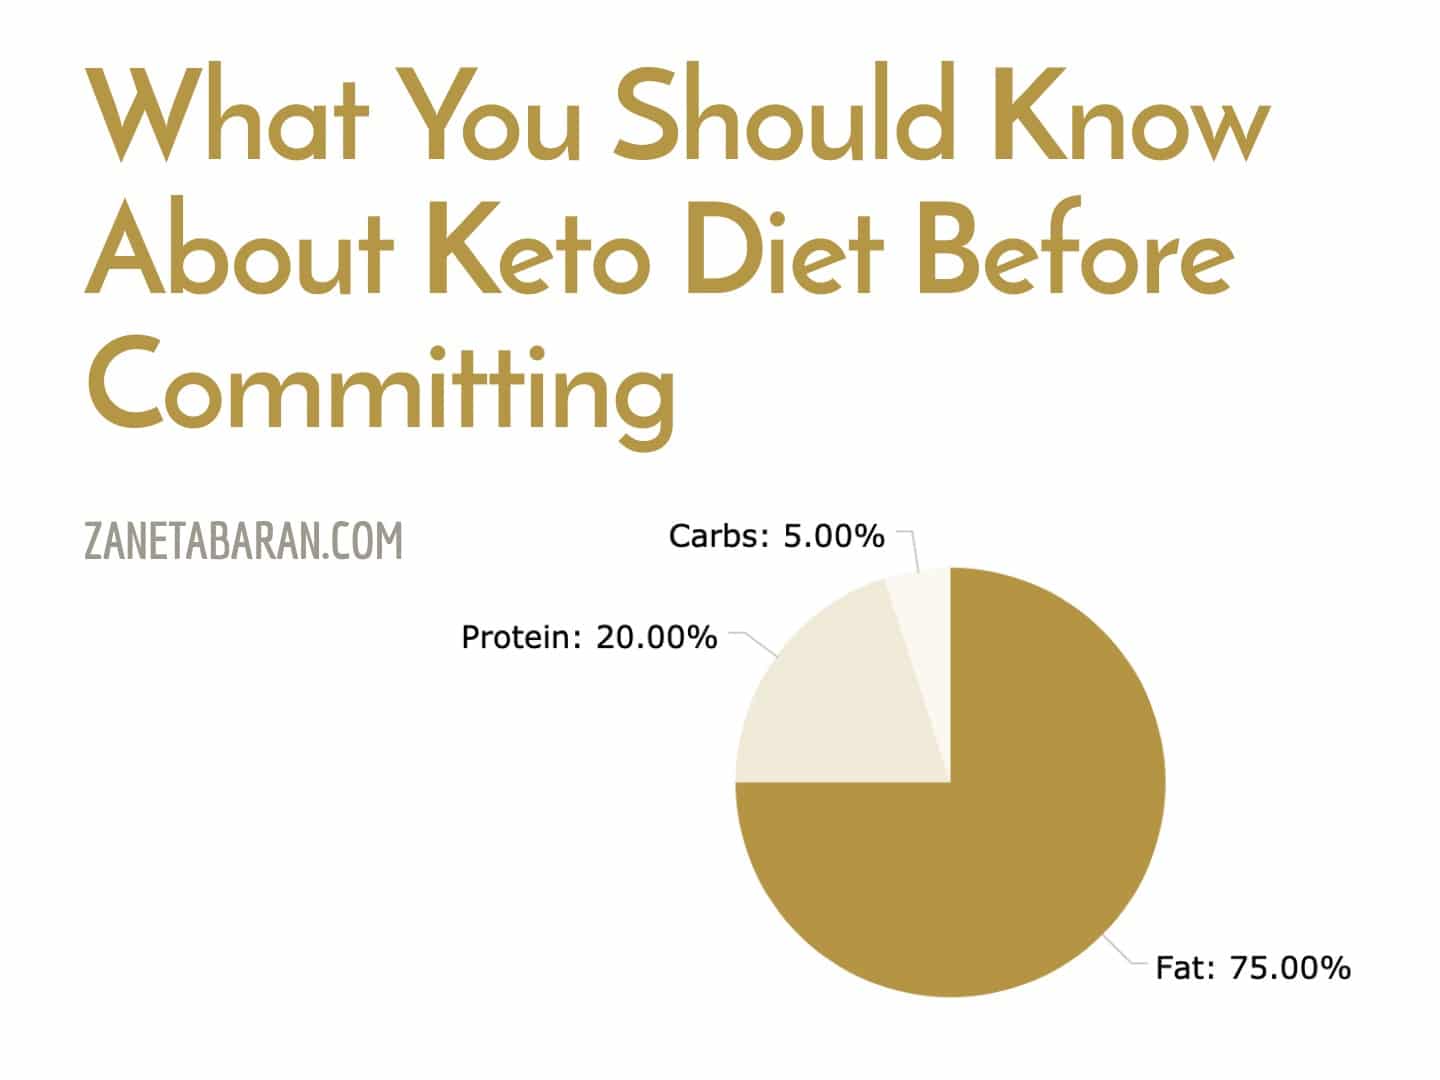 What You Should Know About Keto Diet Before Committing